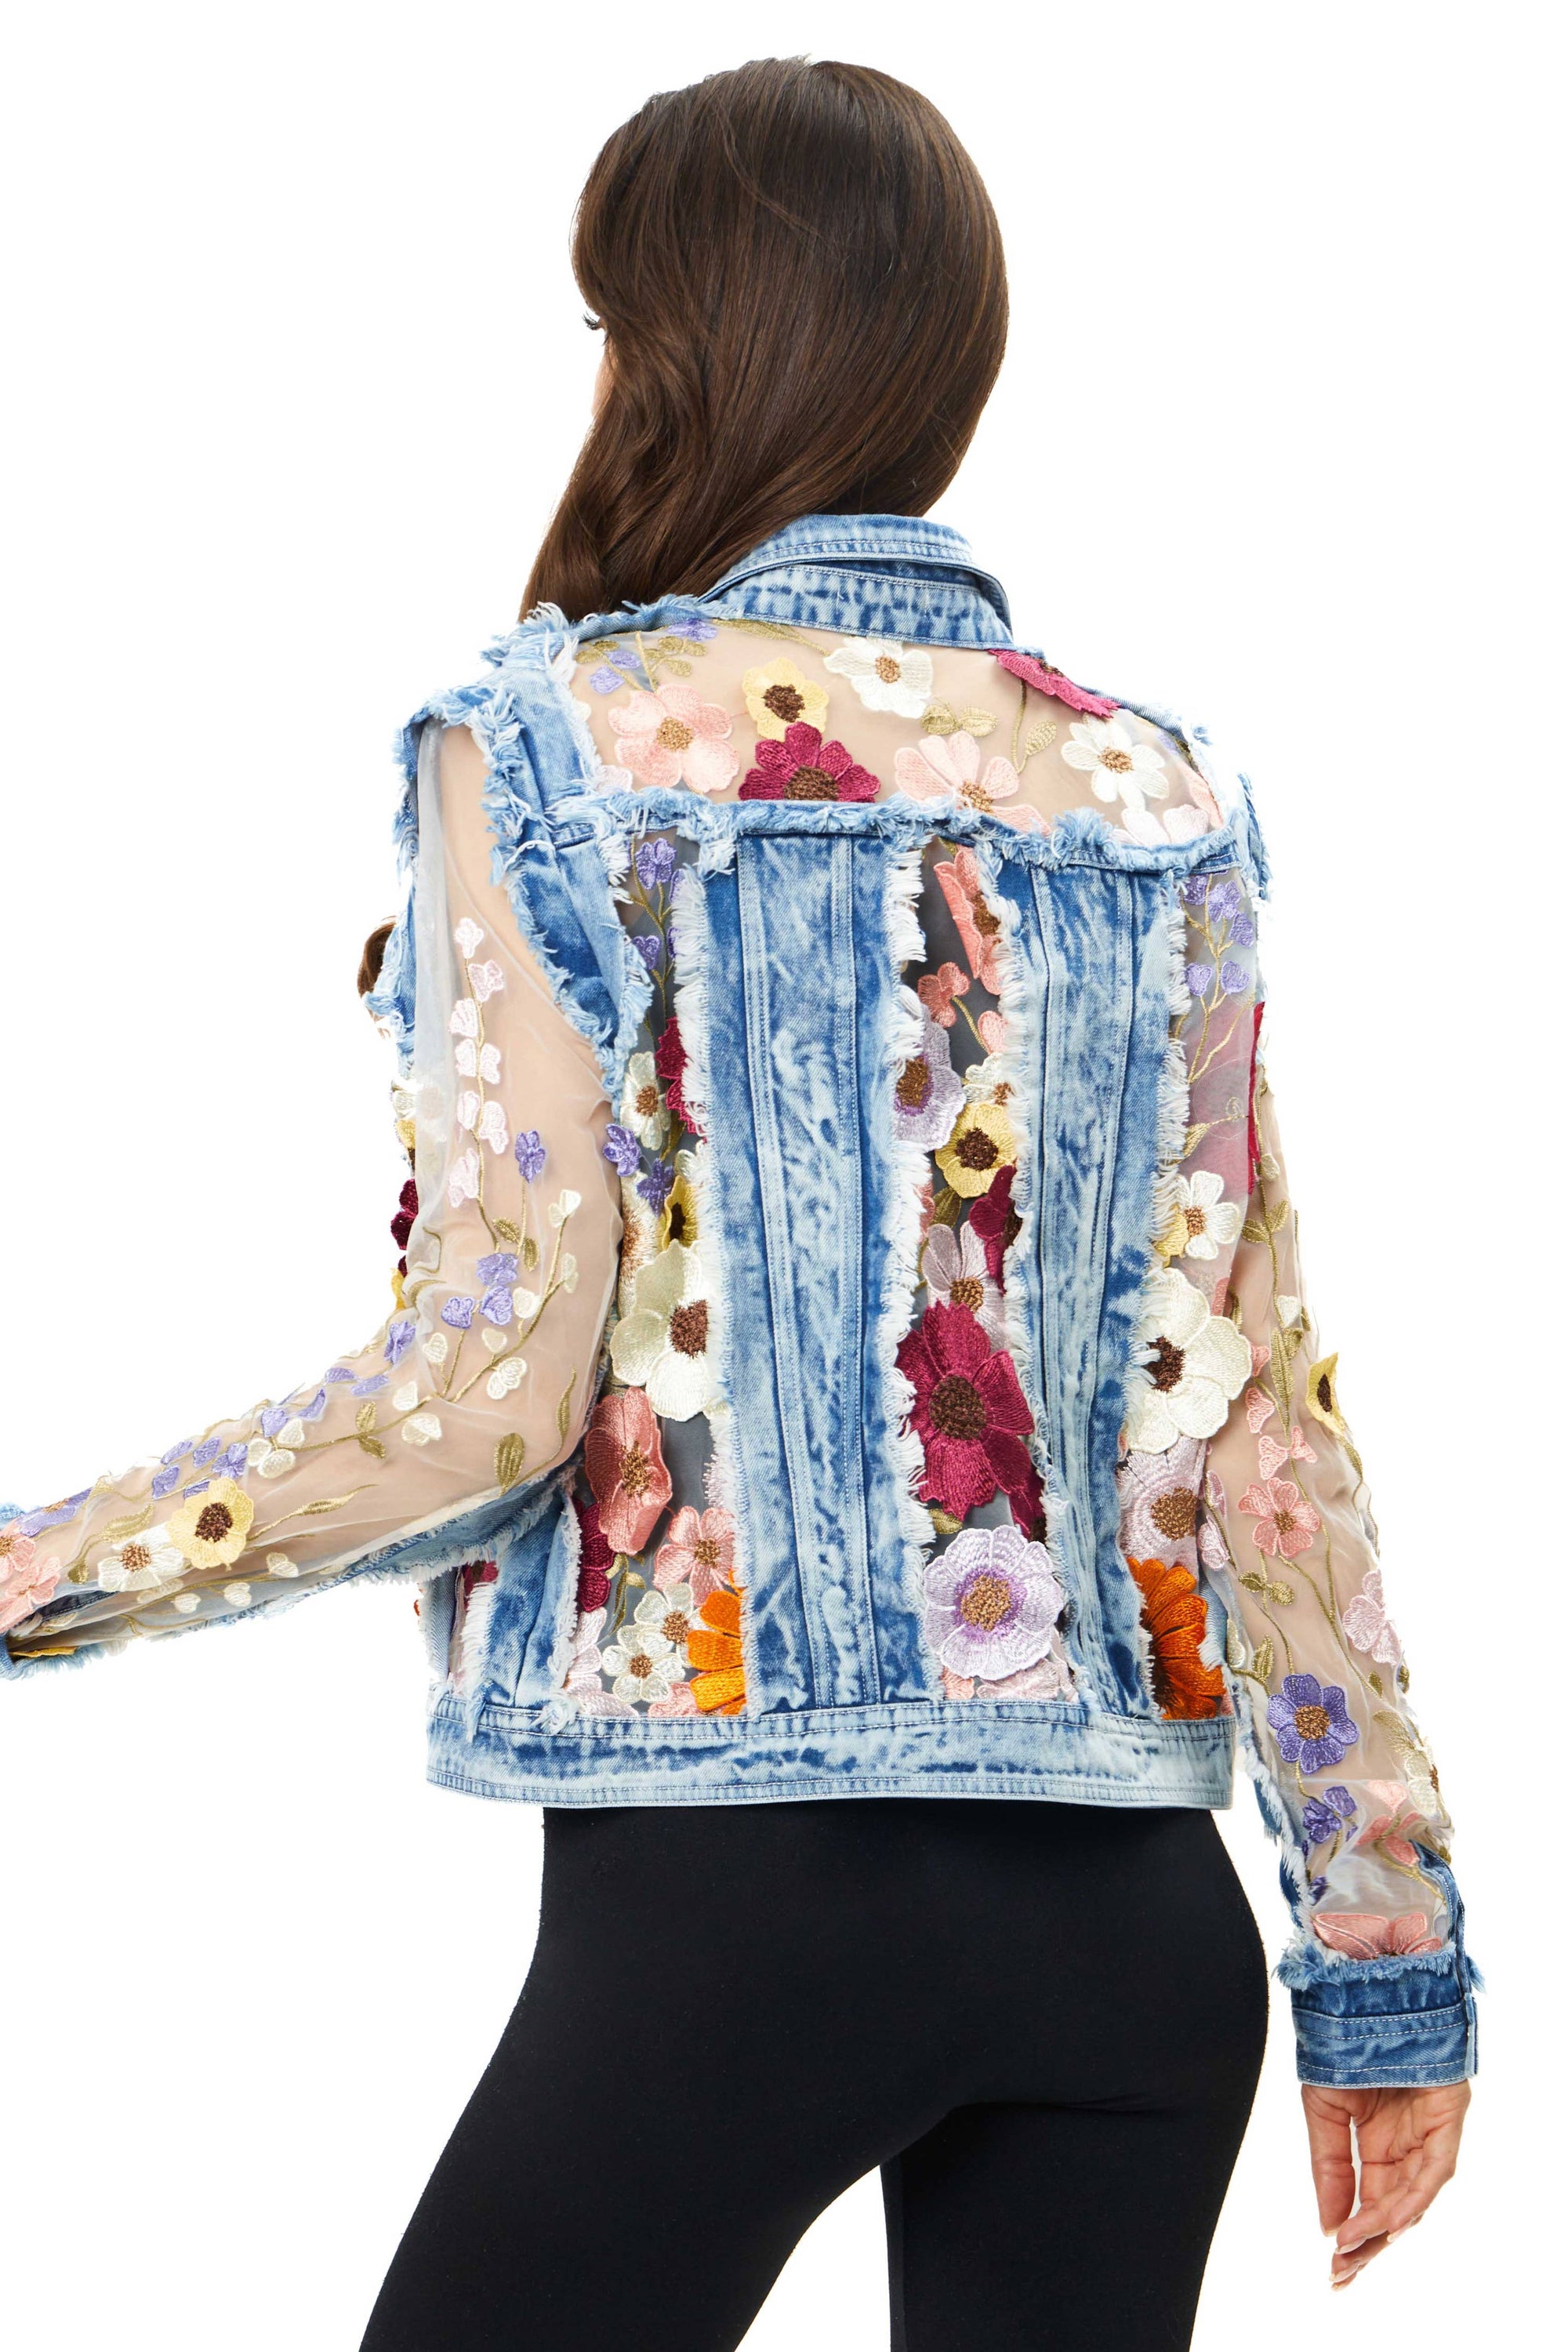 Denim Lace Jacket with Floral Embroidery